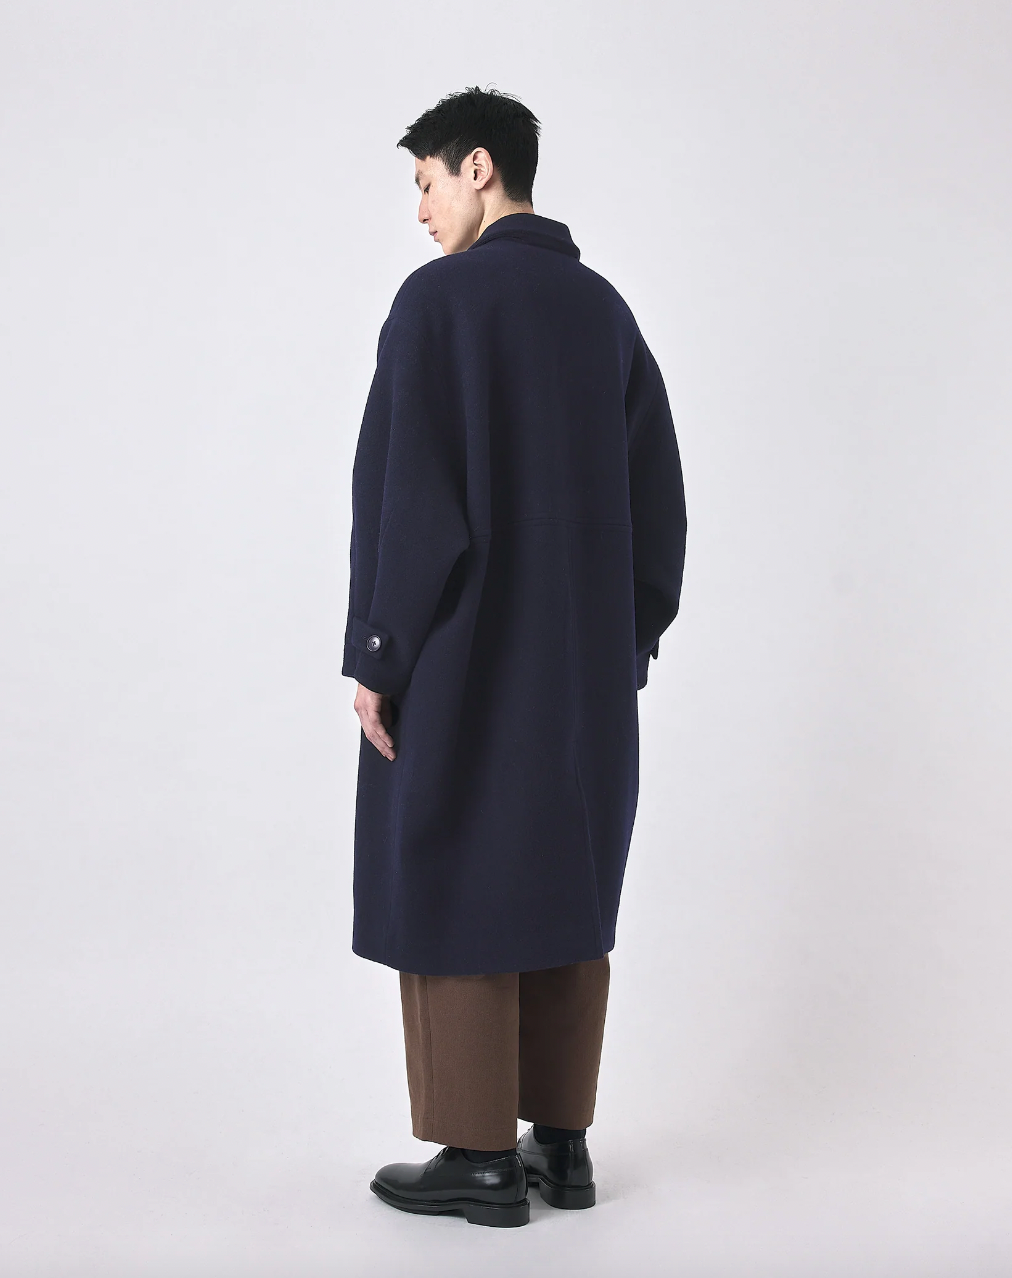 Product Image for Cuffed Wool Coat, Navy